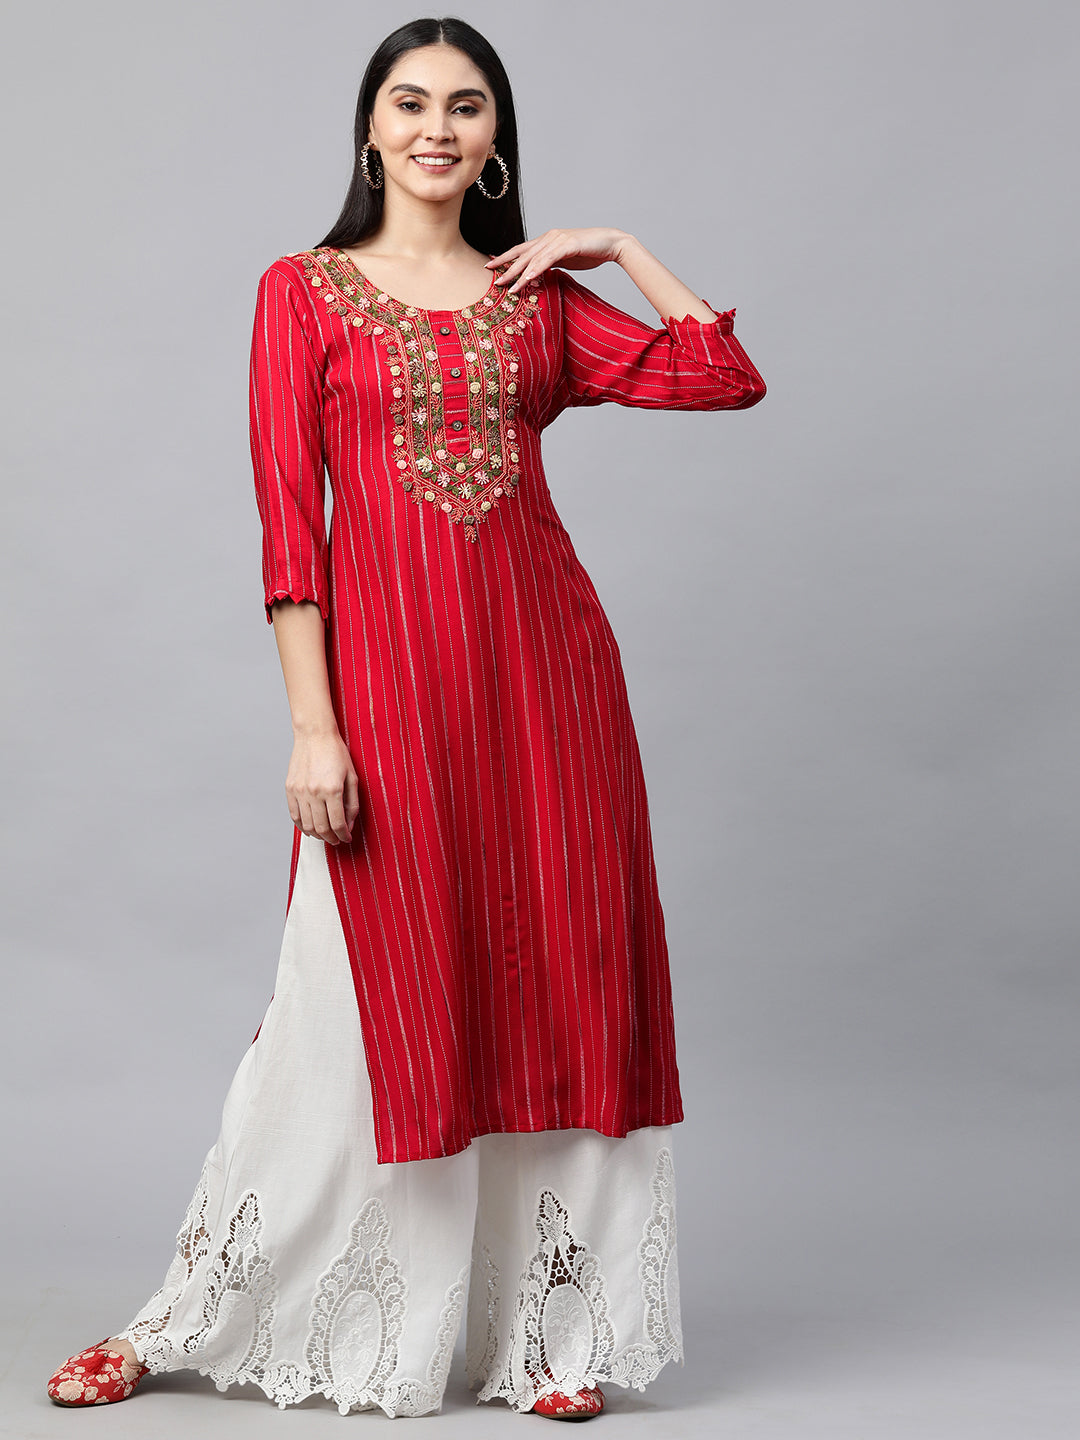 Buy Adorvii Womens Bright Red Cotton kurti in uneven cut with Bottle green  palazzo in golden print motifs at Amazonin